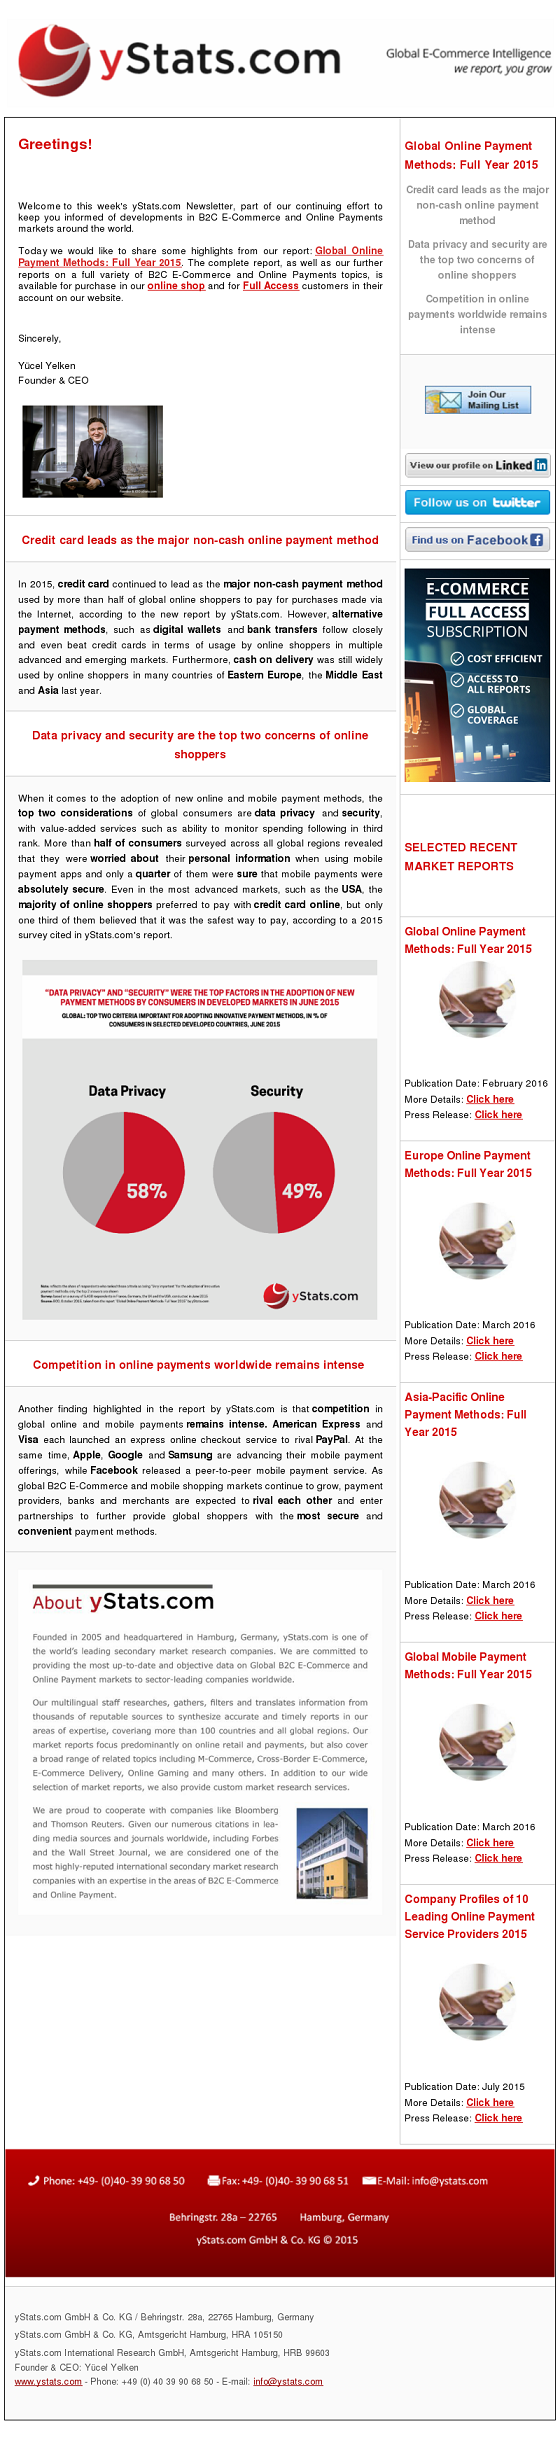 Newsletter about latest yStats.com report: Global Online Payment Methods: Full Year 2015 with free facts into the online payment market worldwide.In 2015, credit card continued to lead as the major non-cash payment method used by more than half of global online shoppers to pay for purchases made via the Internet, according to the new report by yStats.com. However, alternative payment methods, such as digital wallets and bank transfers follow closely and even beat credit cards in terms of usage by online shoppers in multiple advanced and emerging markets. Furthermore, cash on delivery was still widely used by online shoppers in many countries of Eastern Europe, the Middle East and Asia last year.

When it comes to the adoption of new online and mobile payment methods, the top two considerations of global consumers are data privacy and security, with value-added services such as ability to monitor spending following in third rank. More than half of consumers surveyed across all global regions revealed that they were worried about their personal information when using mobile payment apps and only a quarter of them were sure that mobile payments were absolutely secure. Even in the most advanced markets, such as the USA, the majority of online shoppers preferred to pay with credit card online, but only one third of them believed that it was the safest way to pay, according to a 2015 survey cited in yStats.com’s report.

Another finding highlighted in the report by yStats.com is that competition in global online and mobile payments remains intense. American Express and Visa each launched an express online checkout service to rival PayPal. At the same time, Apple, Google and Samsung are advancing their mobile payment offerings, while Facebook released a peer-to-peer mobile payment service. As global B2C E-Commerce and mobile shopping markets continue to grow, payment providers, banks and merchants are expected to rival each other and enter partnerships to further provide global shoppers with the most secure and convenient payment methods.